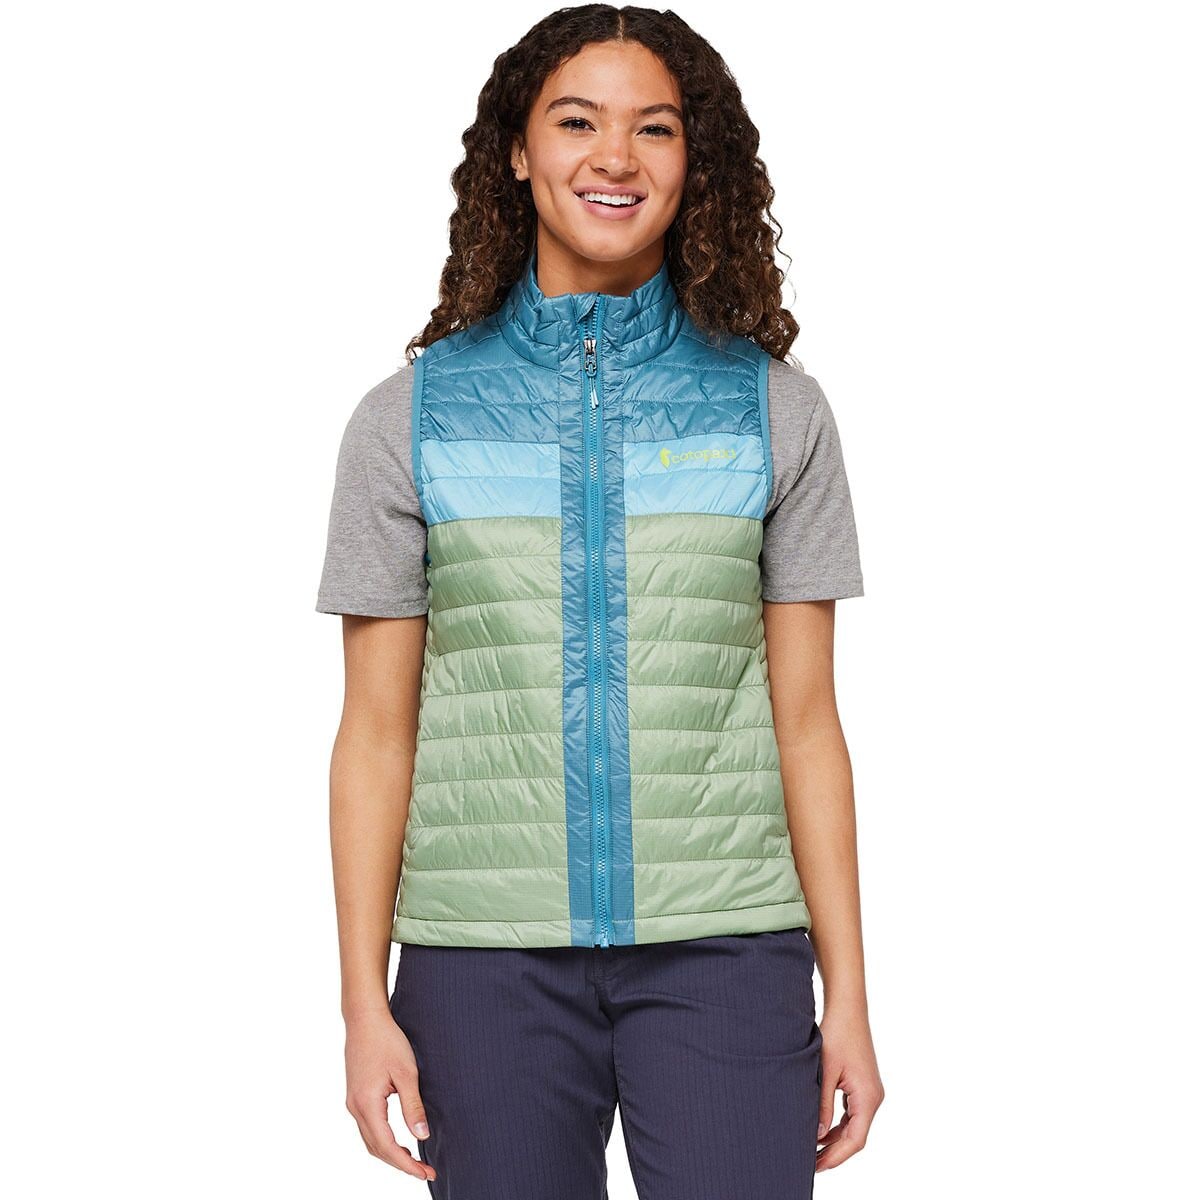 Cotopaxi Capa Insulated Vest - Women's